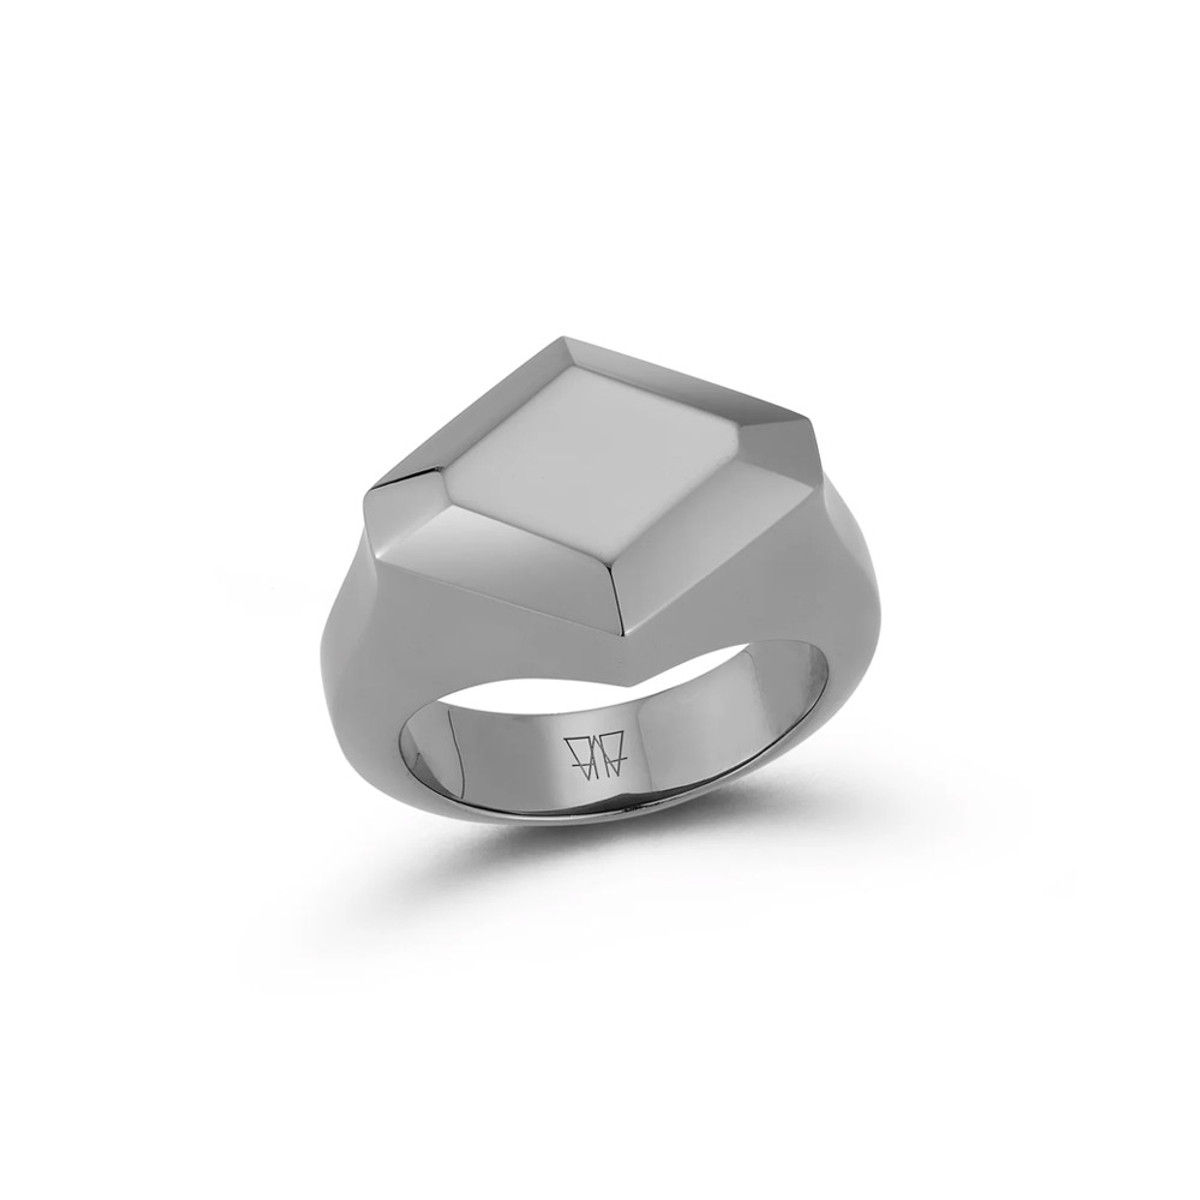 Walters Faith Quentin Sterling Silver and Black Rhodium Faceted Hexagon Signet Ring- Size 8.5-56159 Product Image